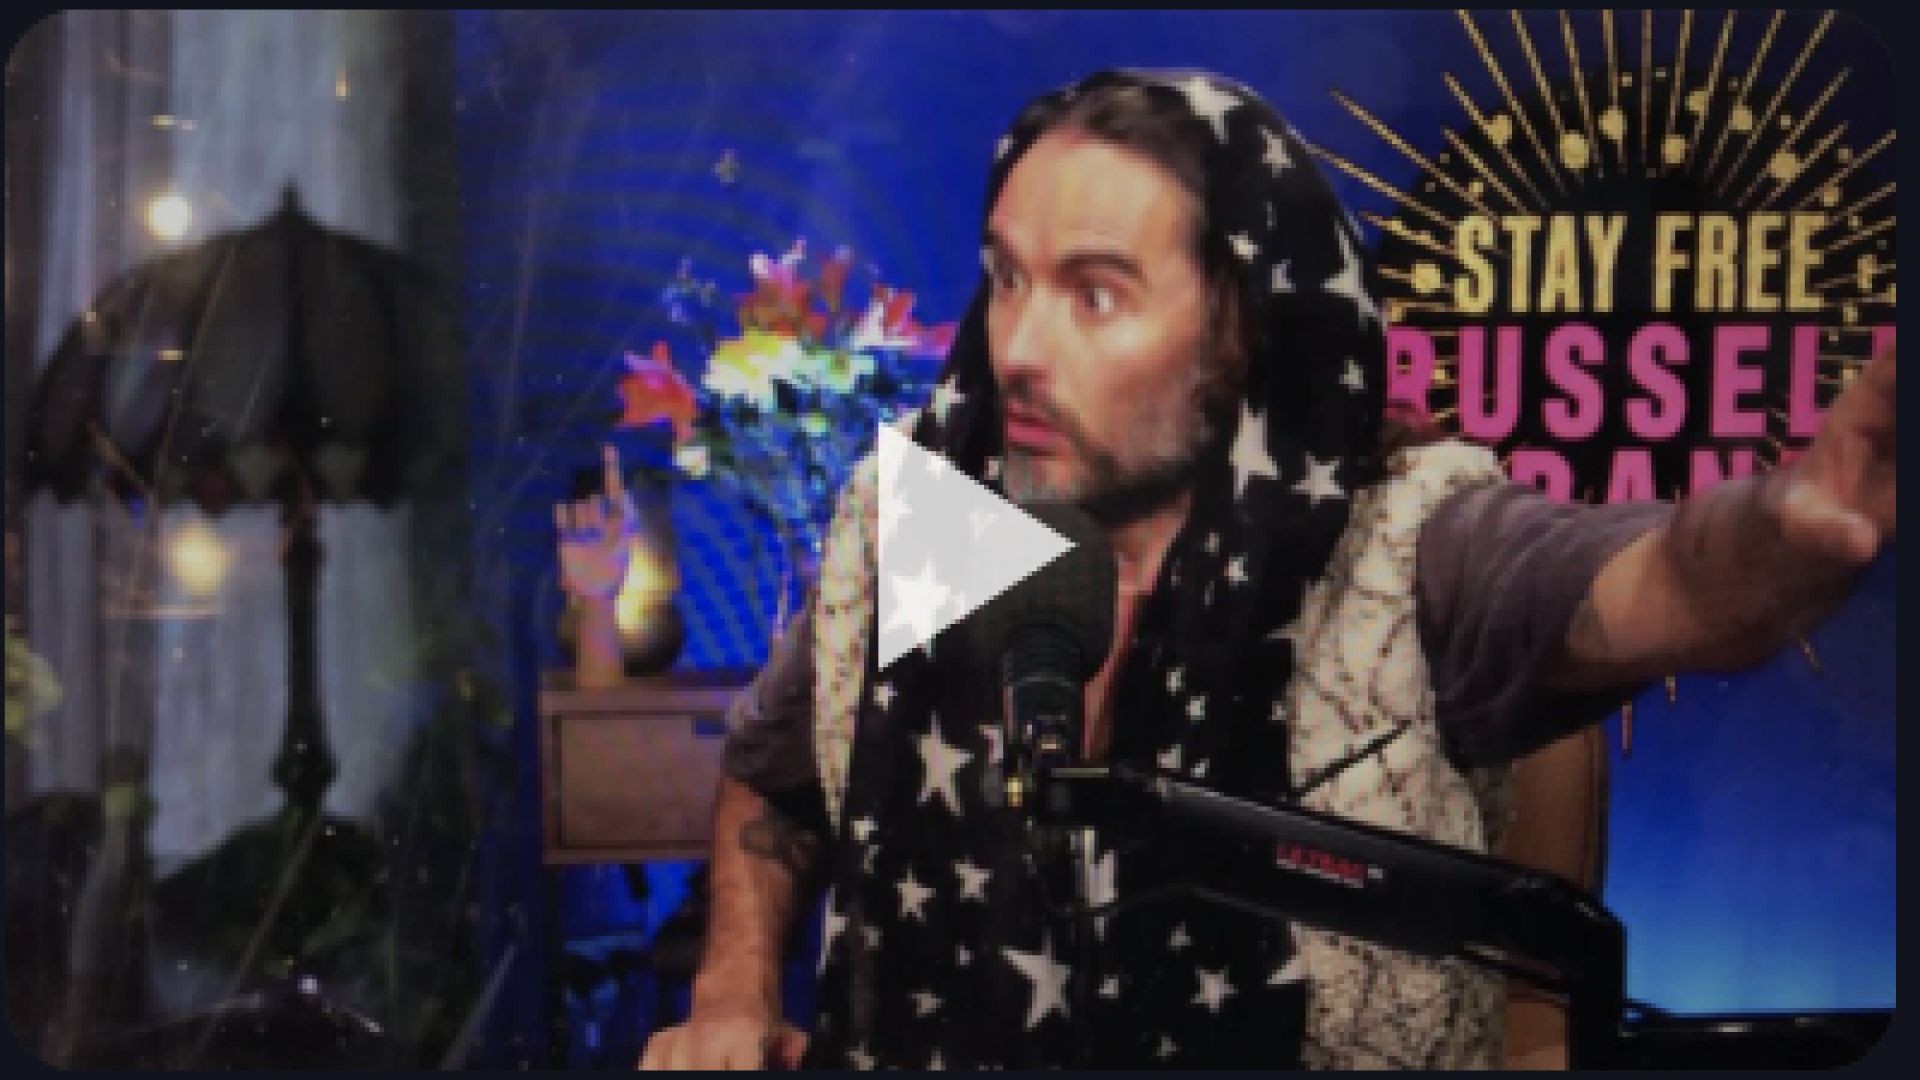 Censored Russell Brand, full interview link on rumble below.